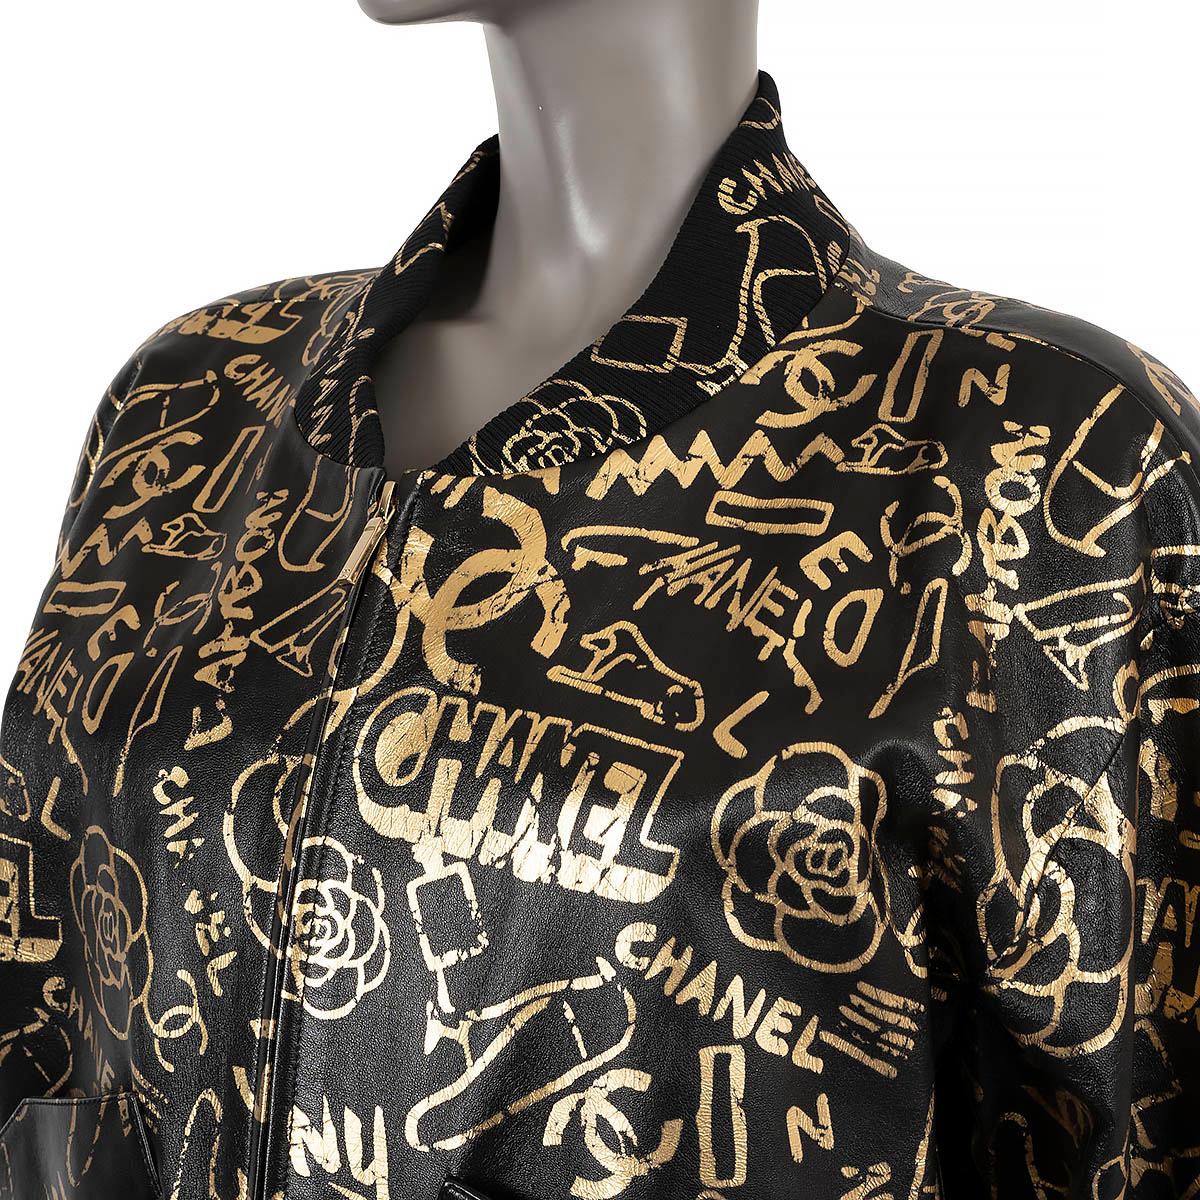 CHANEL black & gold leather 2019 19A NEW YORK GRAFFITI Bomber Jacket 38 S For Sale 2